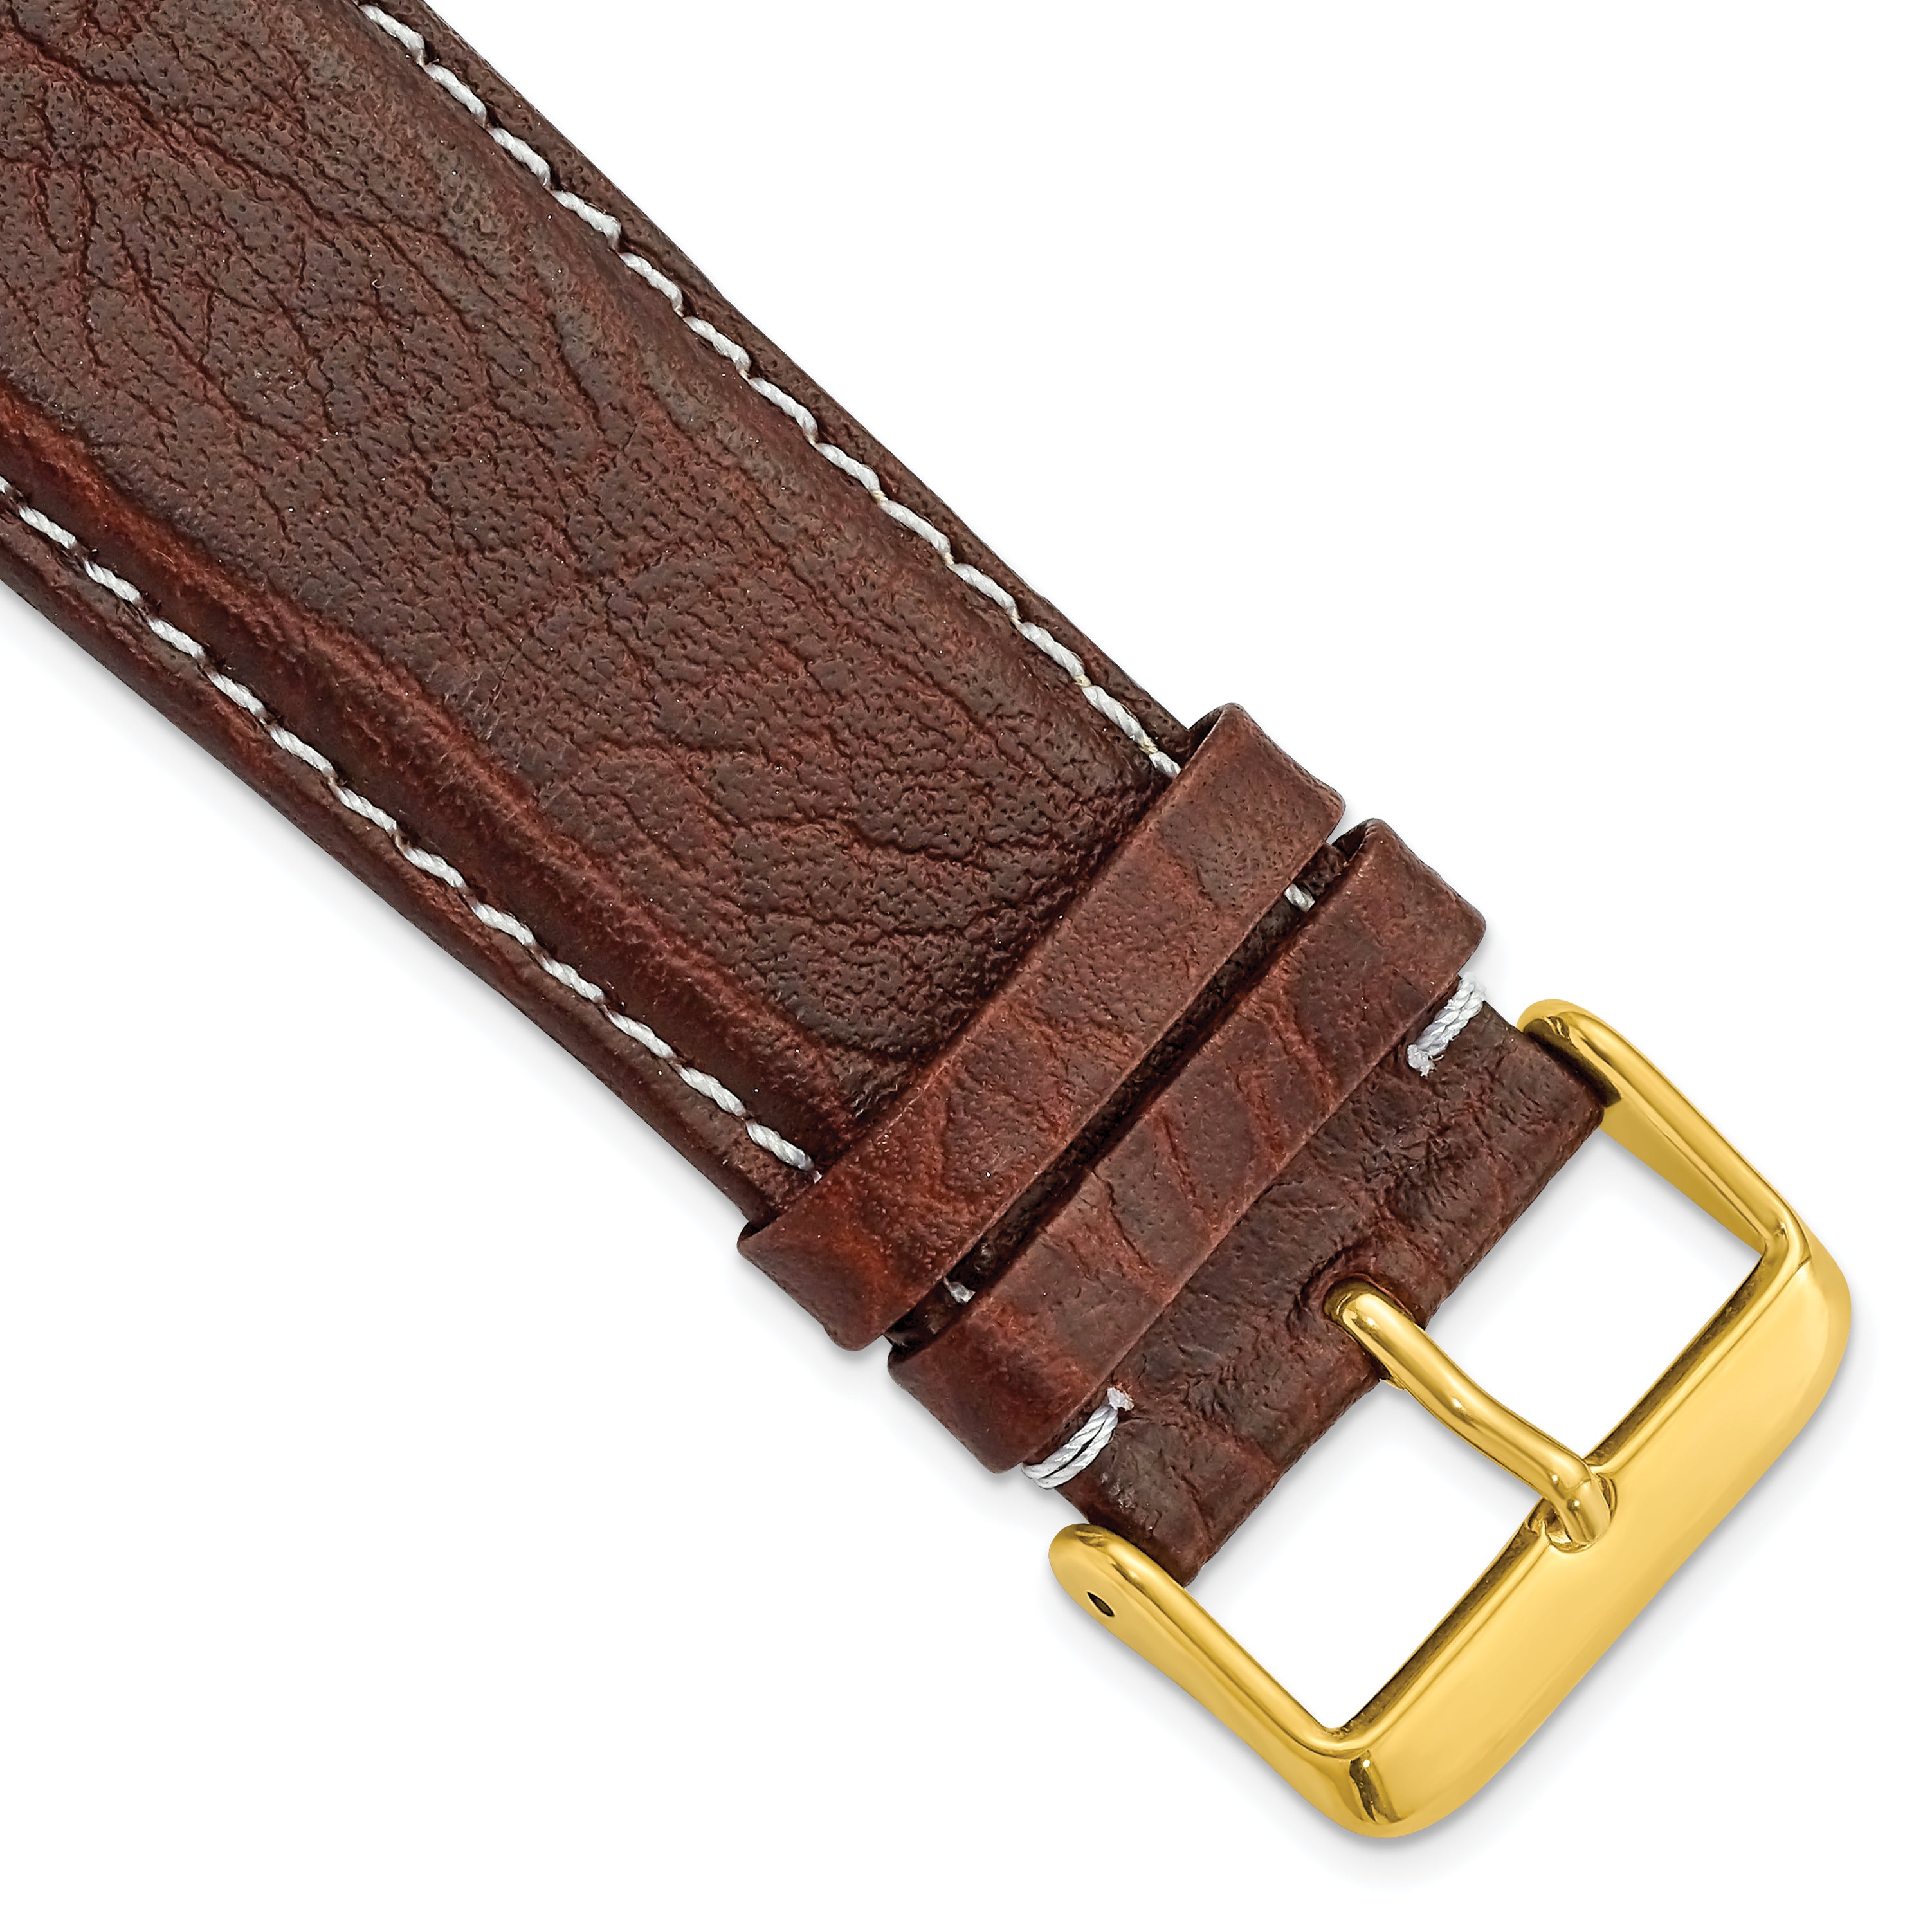 DeBeer 28mm Dark Brown Sport Leather with White Stitching and Gold-tone Buckle 7.5 inch Watch Band